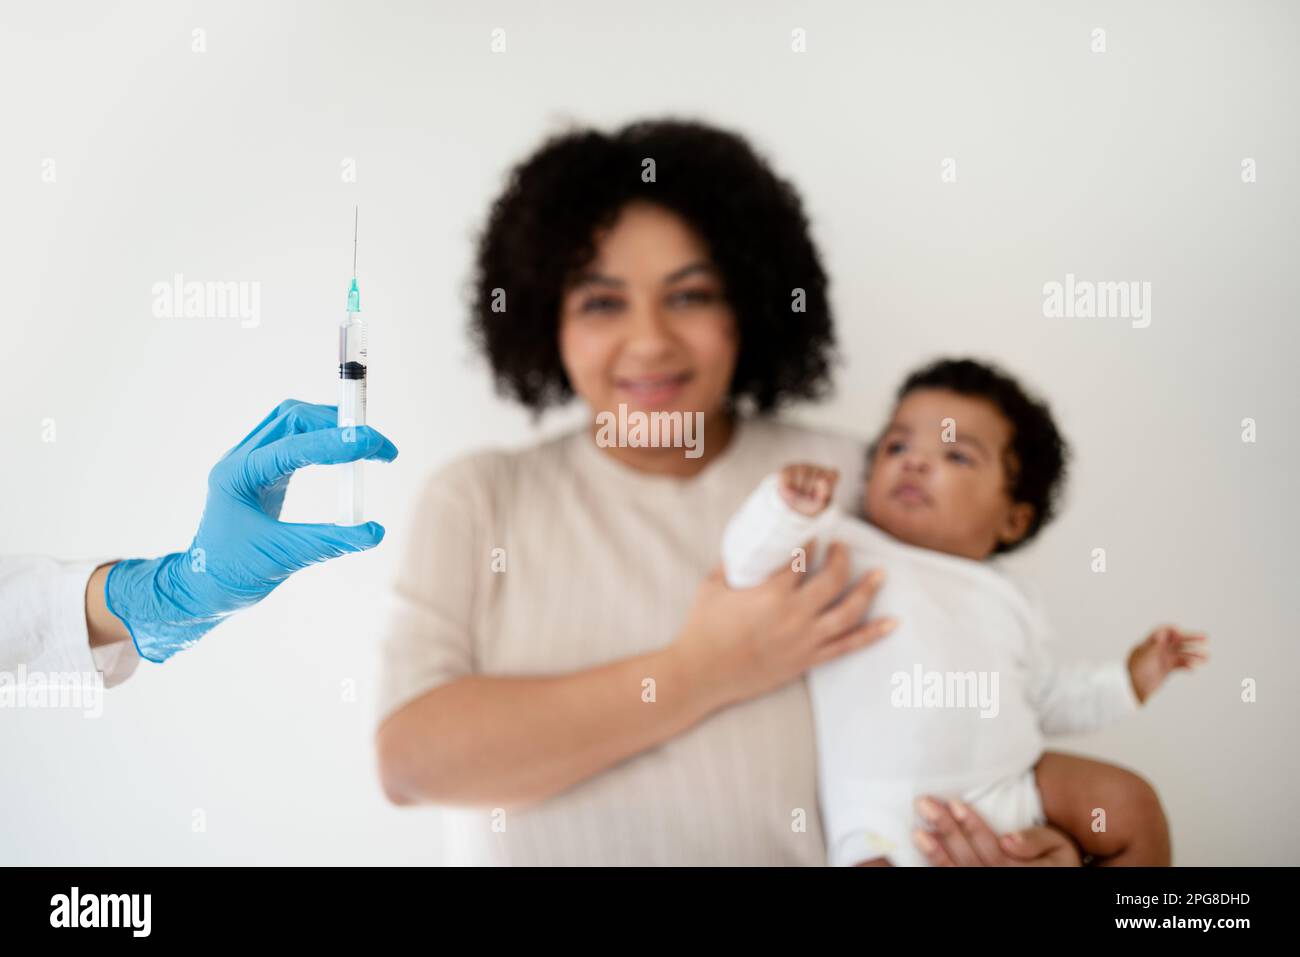 Smiling loving young african american woman holding baby in her arms, looks at doctor hand with syringe Stock Photo